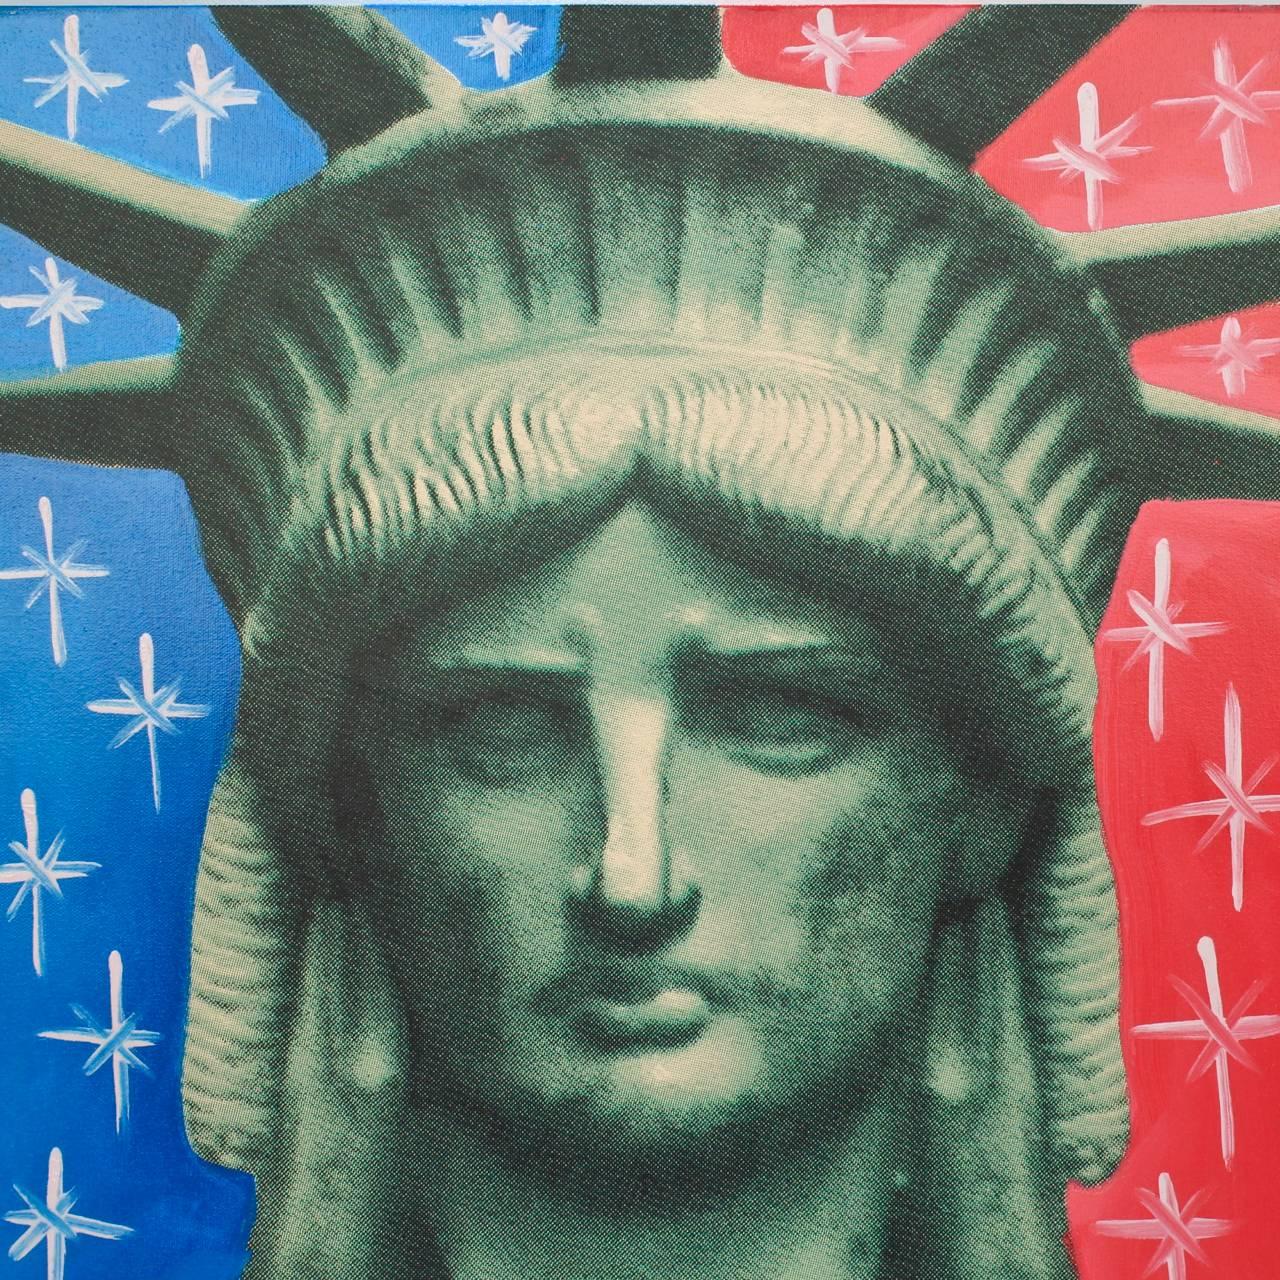 Title: Liberty head.

By: Steve Kaufman.

Date: 1990s.

A limited edition screen-print on canvas with hand embellishments (in oil).

Depicting the head of of the statue of liberty against a blue and red background embellished with